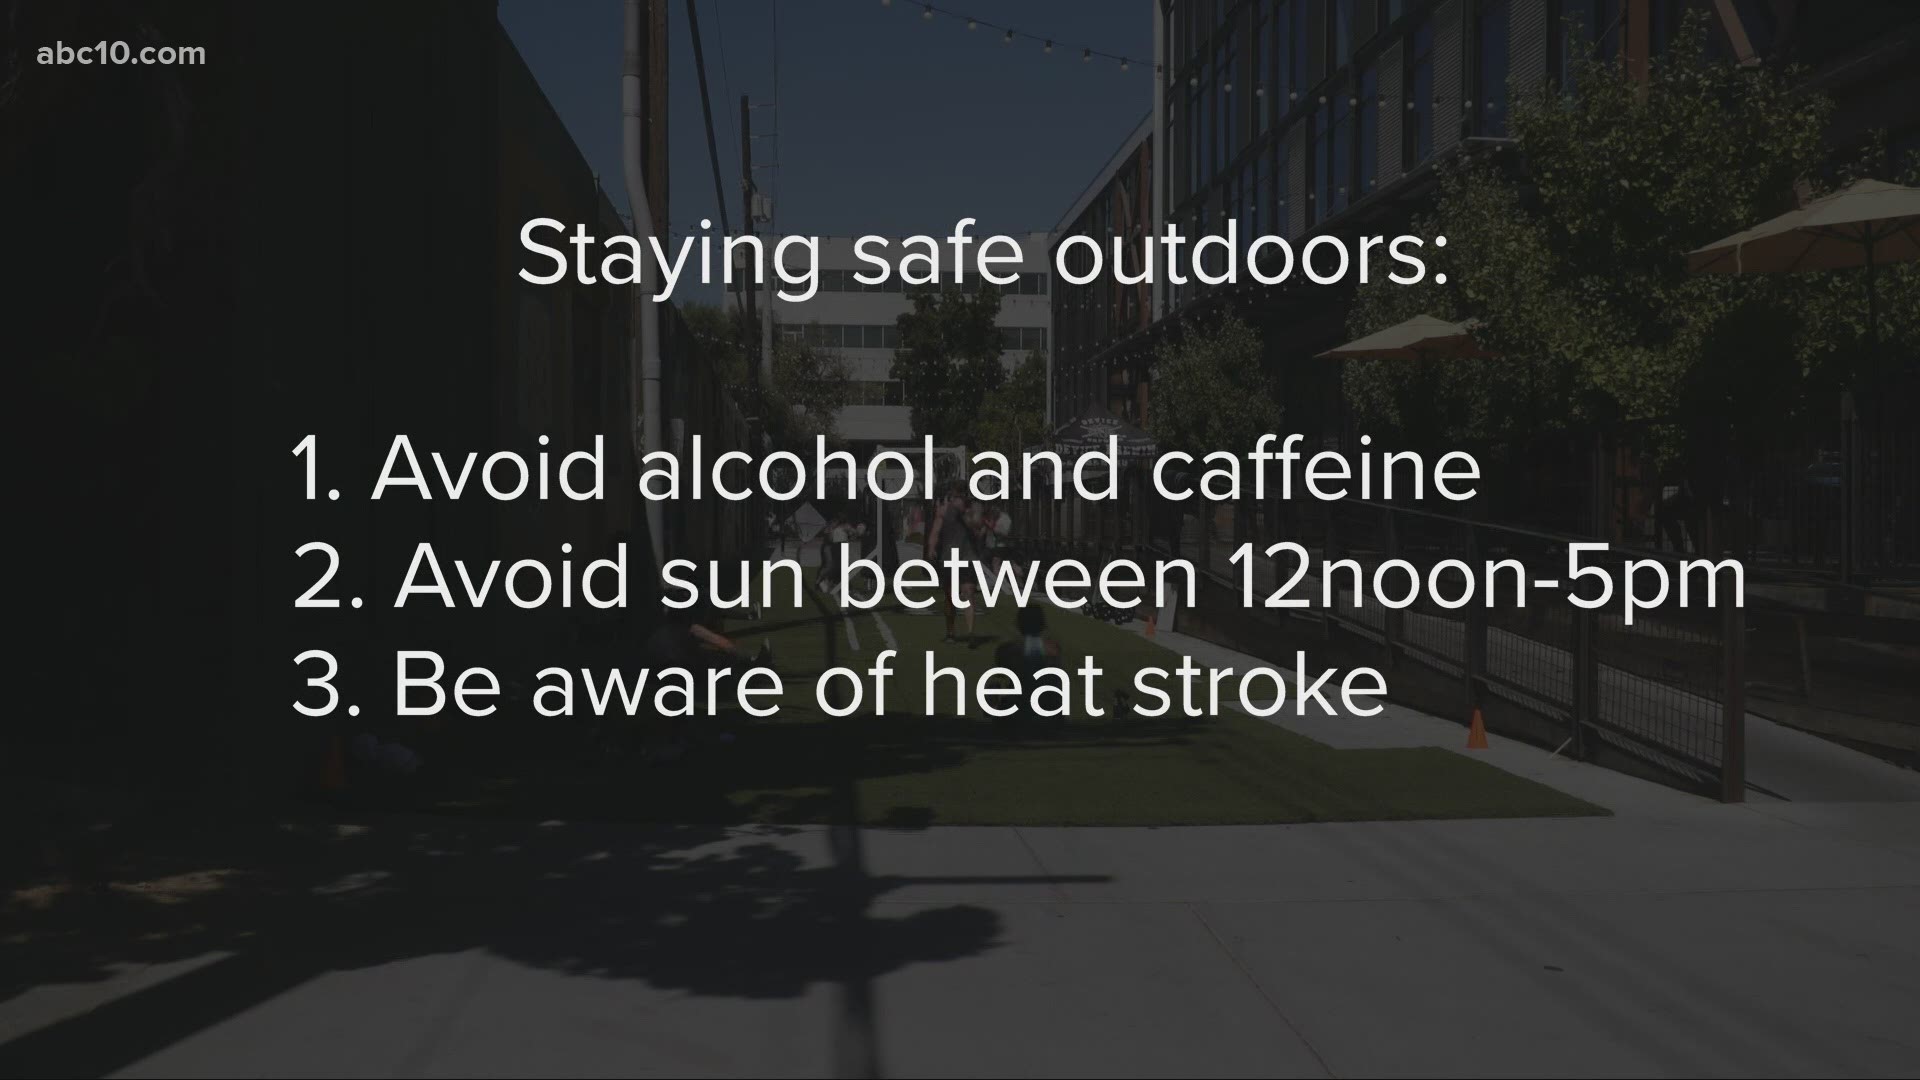 Whether you're heading outdoors or staying inside, there are a couple of things you can do to beat the heat.